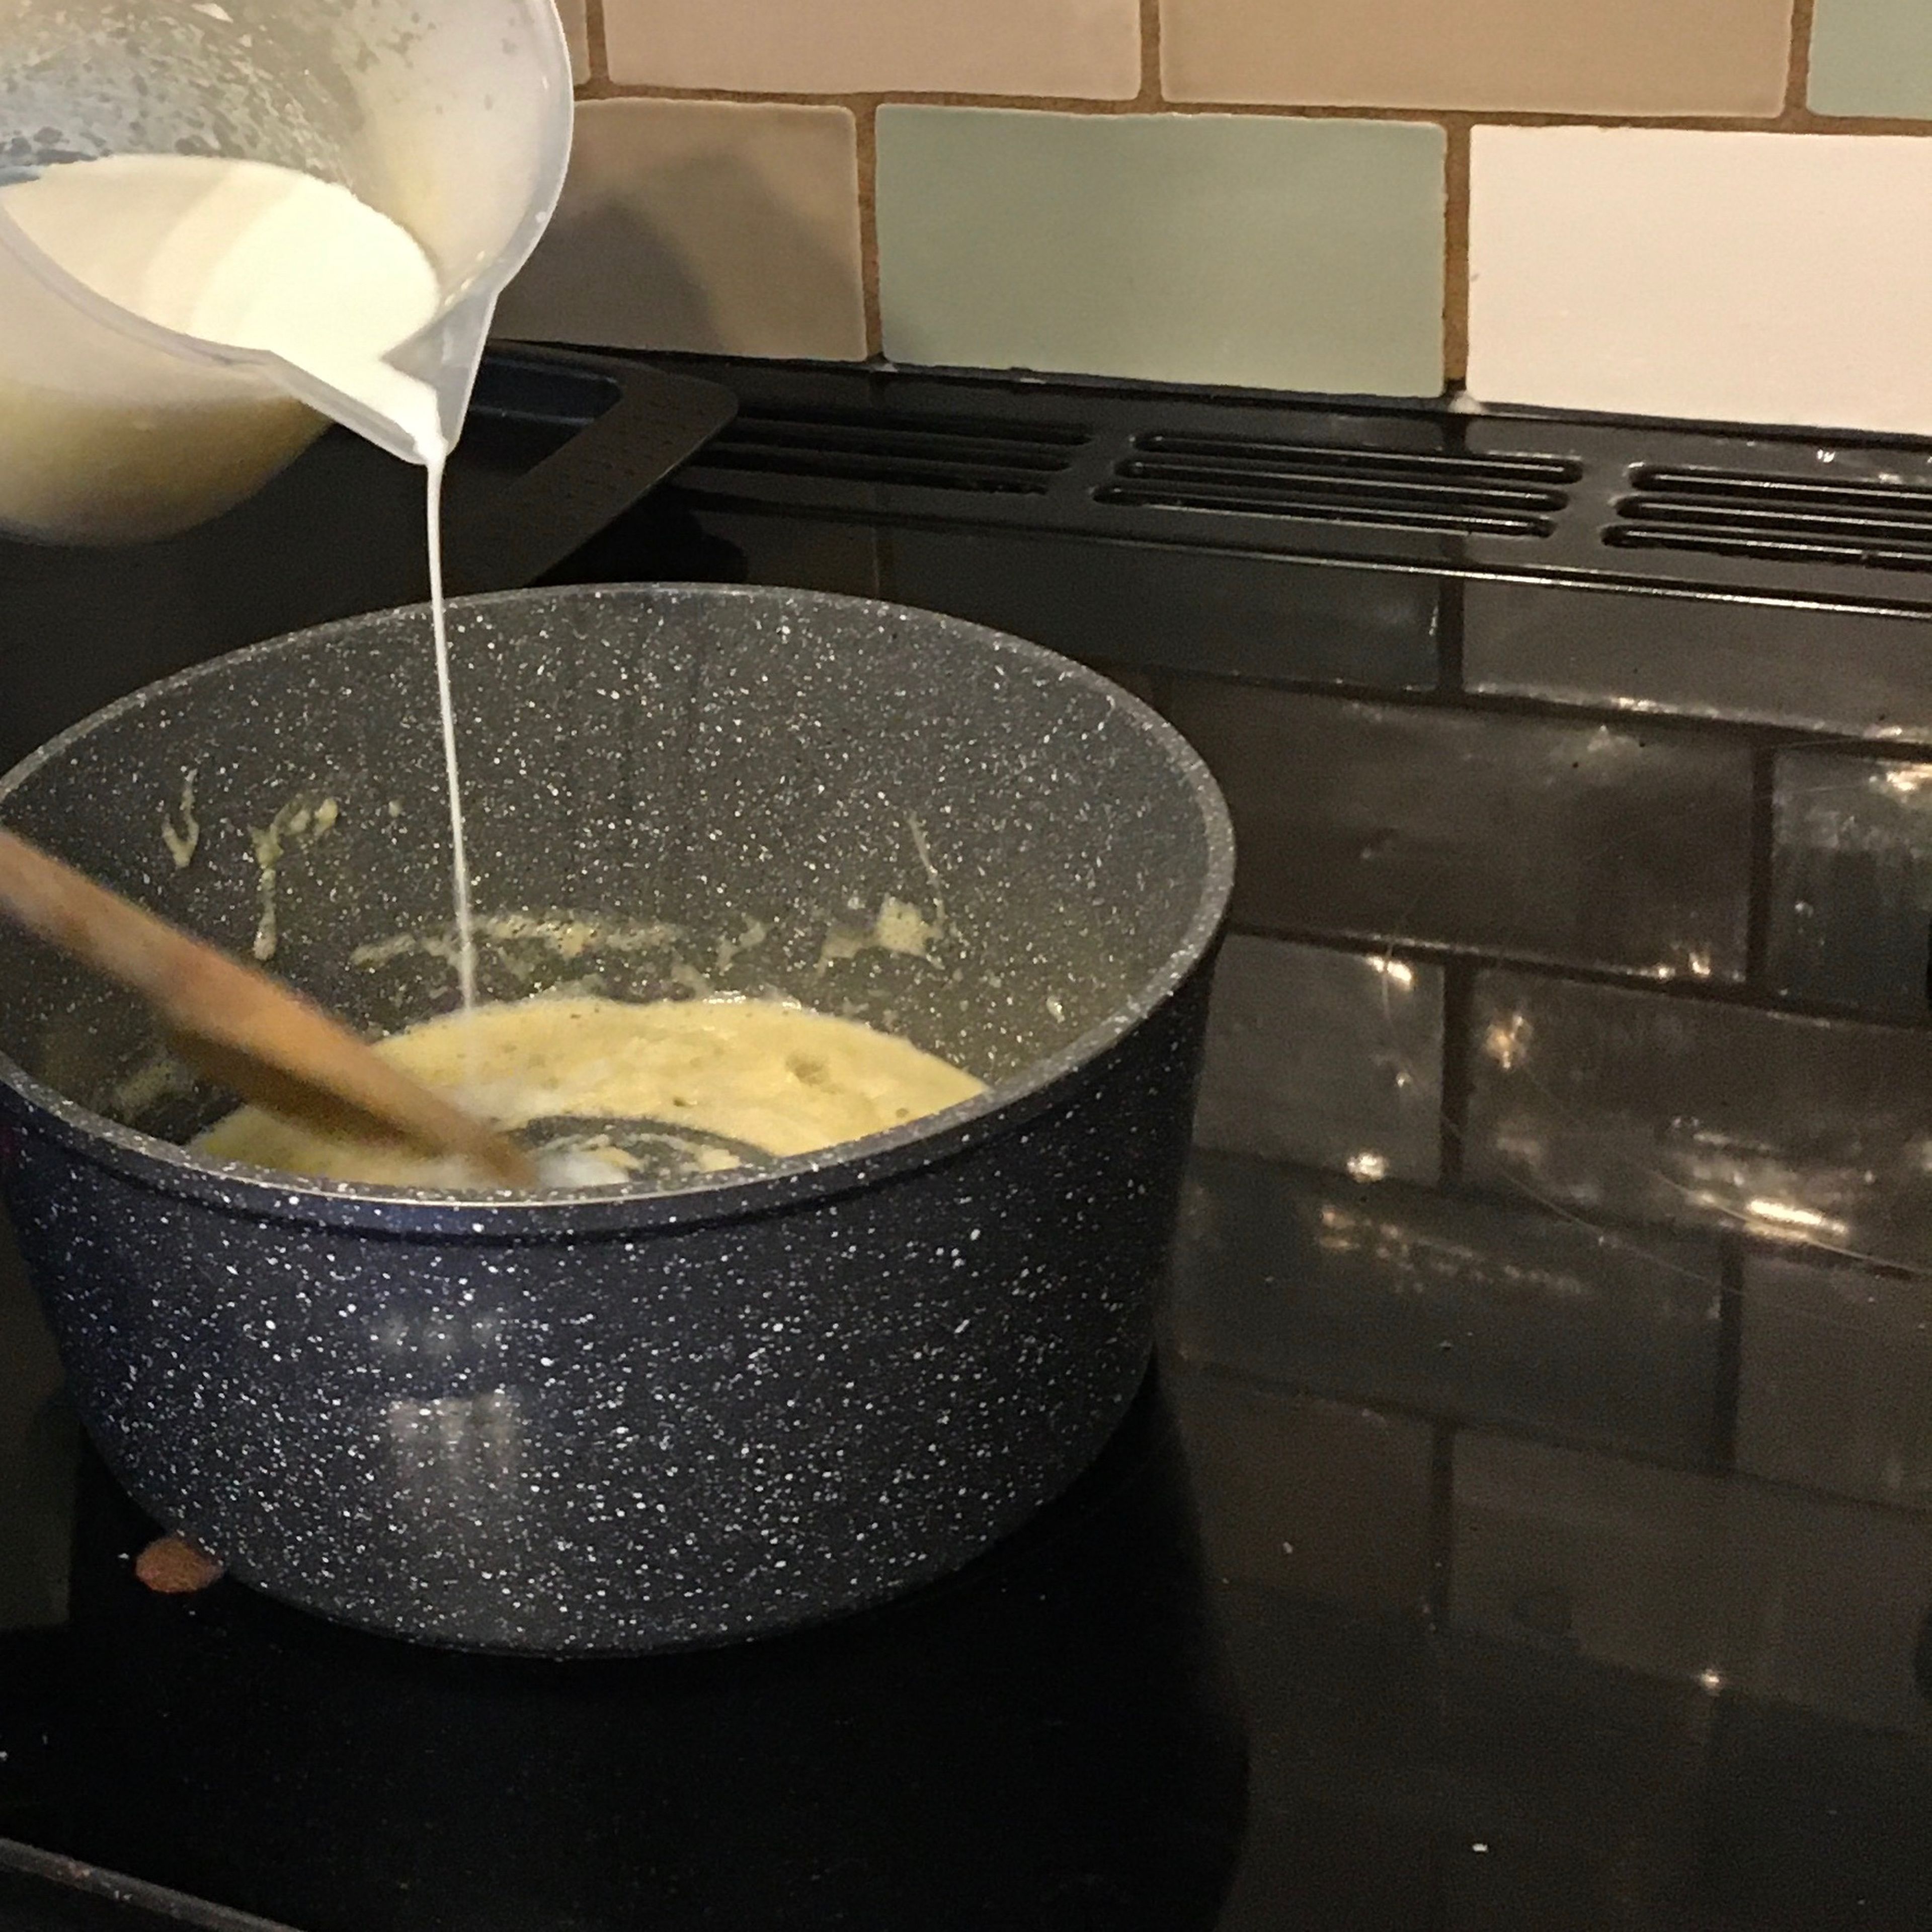 Slowly add the milk to the melted butter and flour stirring continuously until smooth.